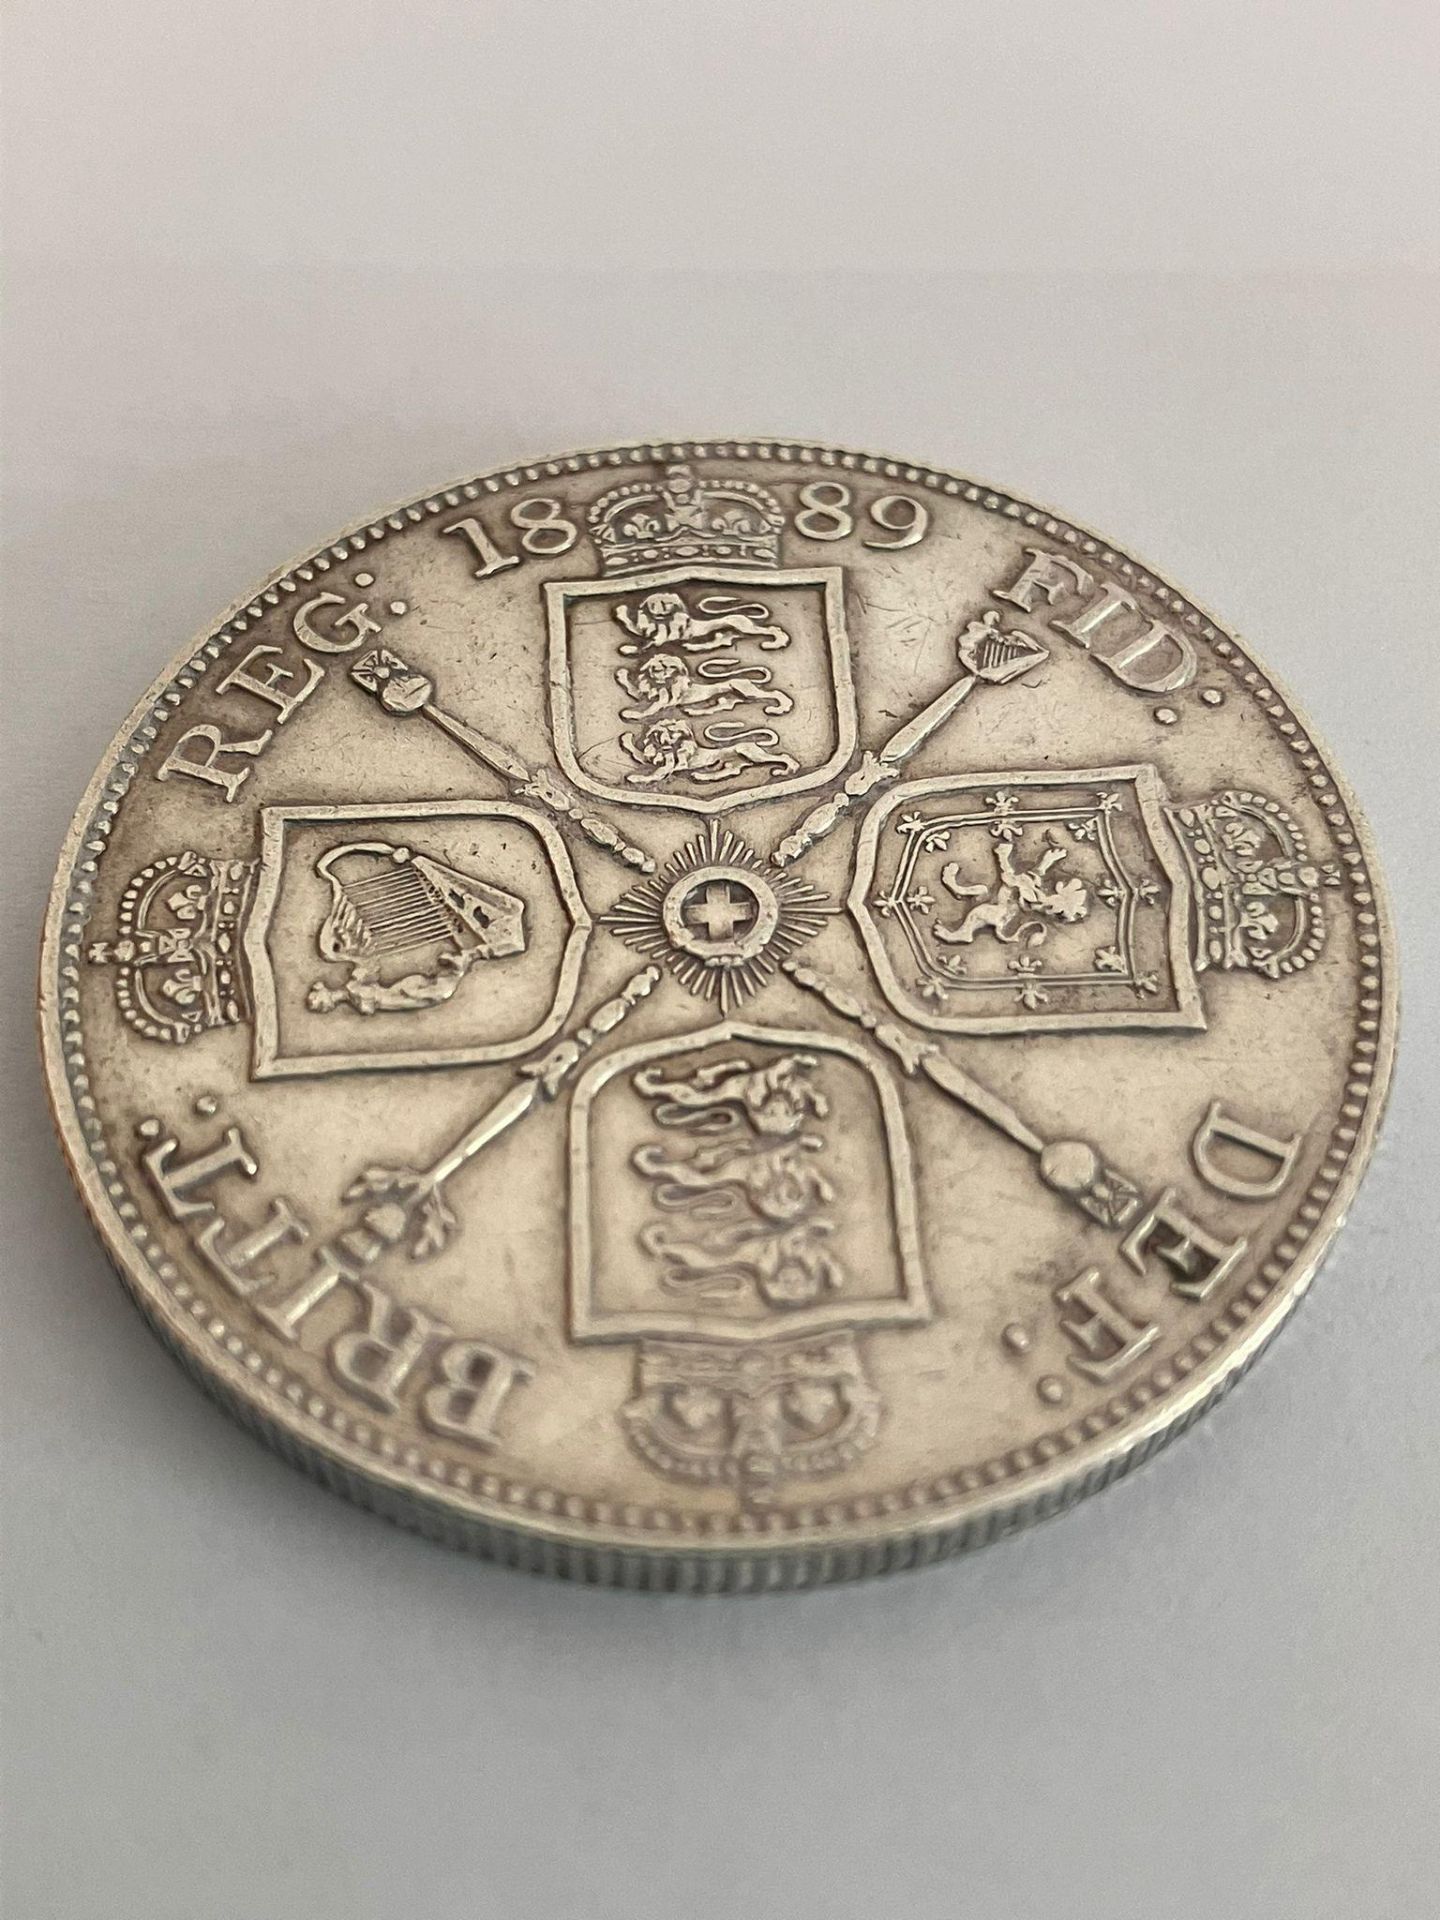 1889 SILVER DOUBLE FLORIN. Condition extra fine almost Brilliant. Having clear and bold raised